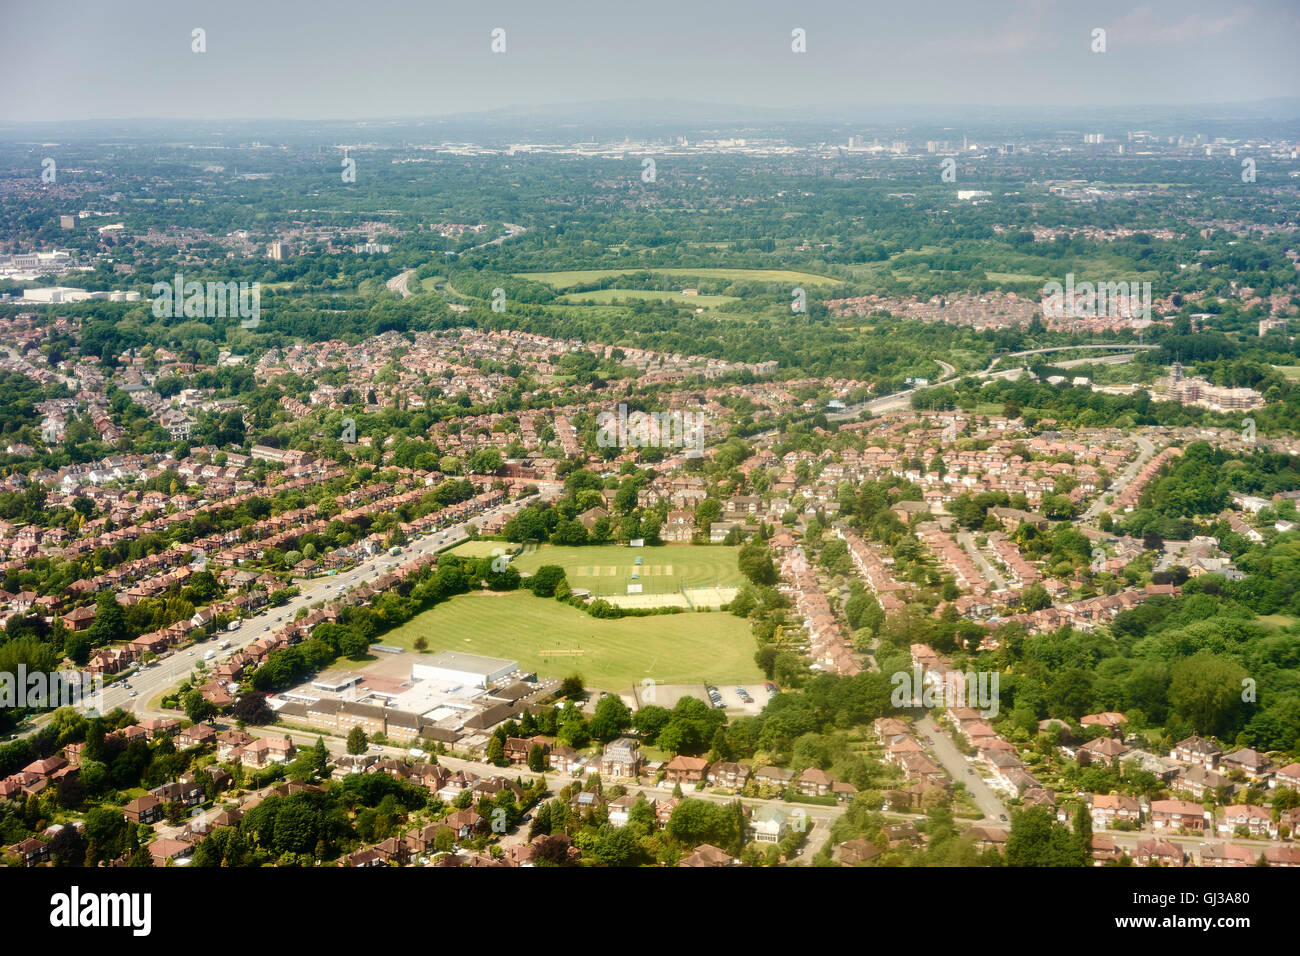 Aerial view of suburban cricket field, Manchester, UK Stock Photo